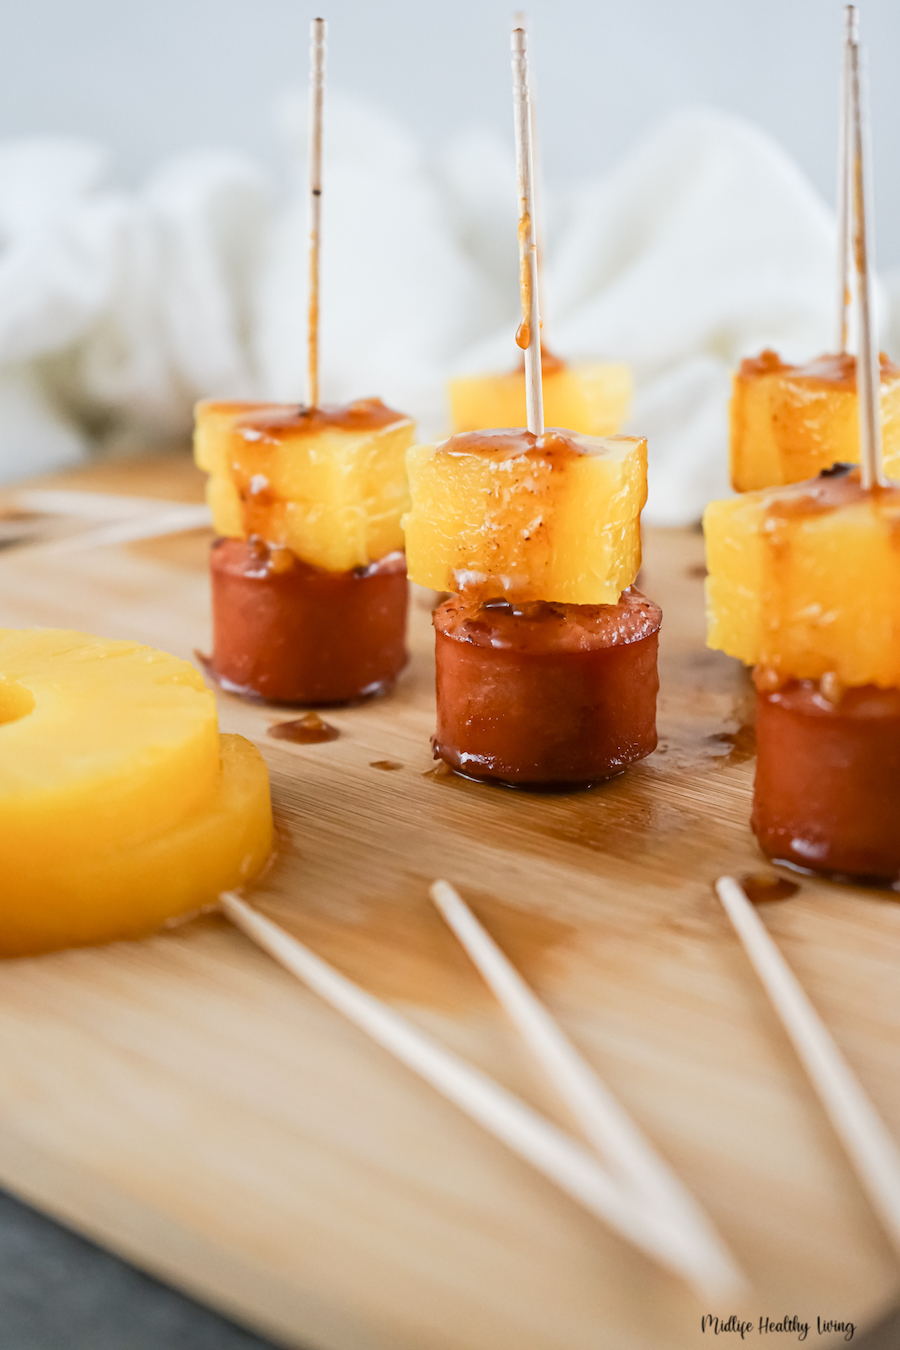 A close up view of the finished pineapple sausage bites ready to serve with skewers.